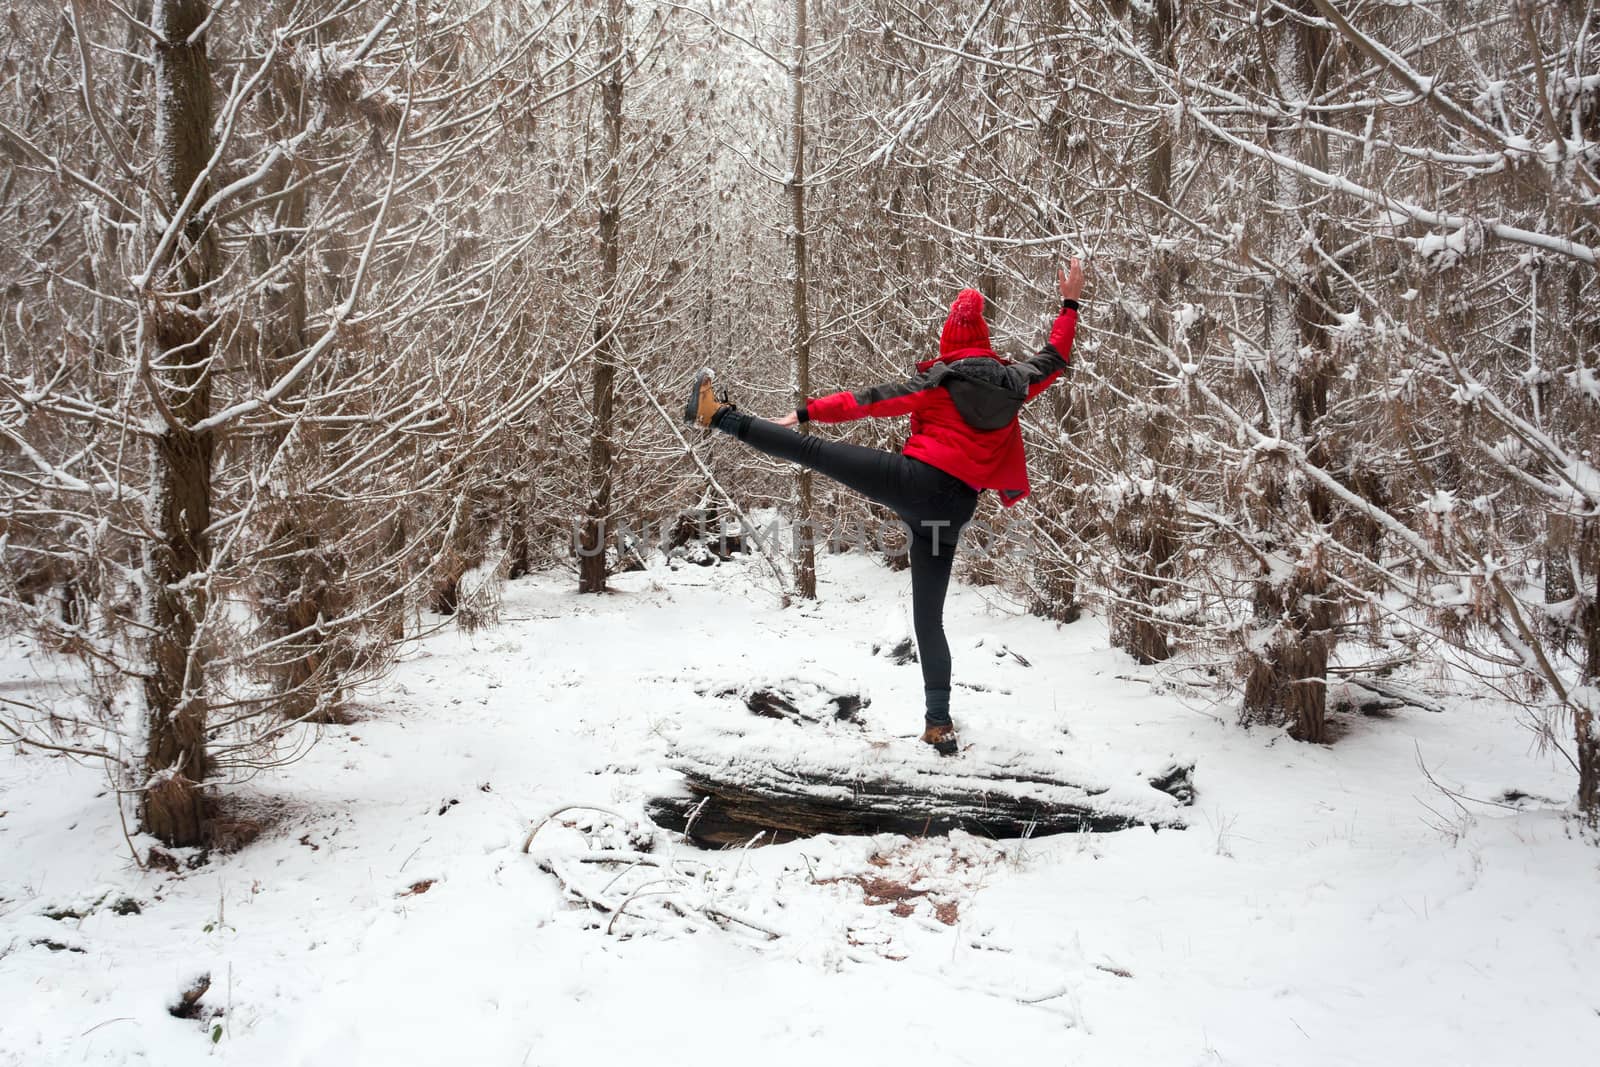 One way to stay warm in freezing temperatures.  Exercising and stretching in the snow while balancing on a snow covered log!  Adventuring out into the  pine forests during winter with fresh snow fall.